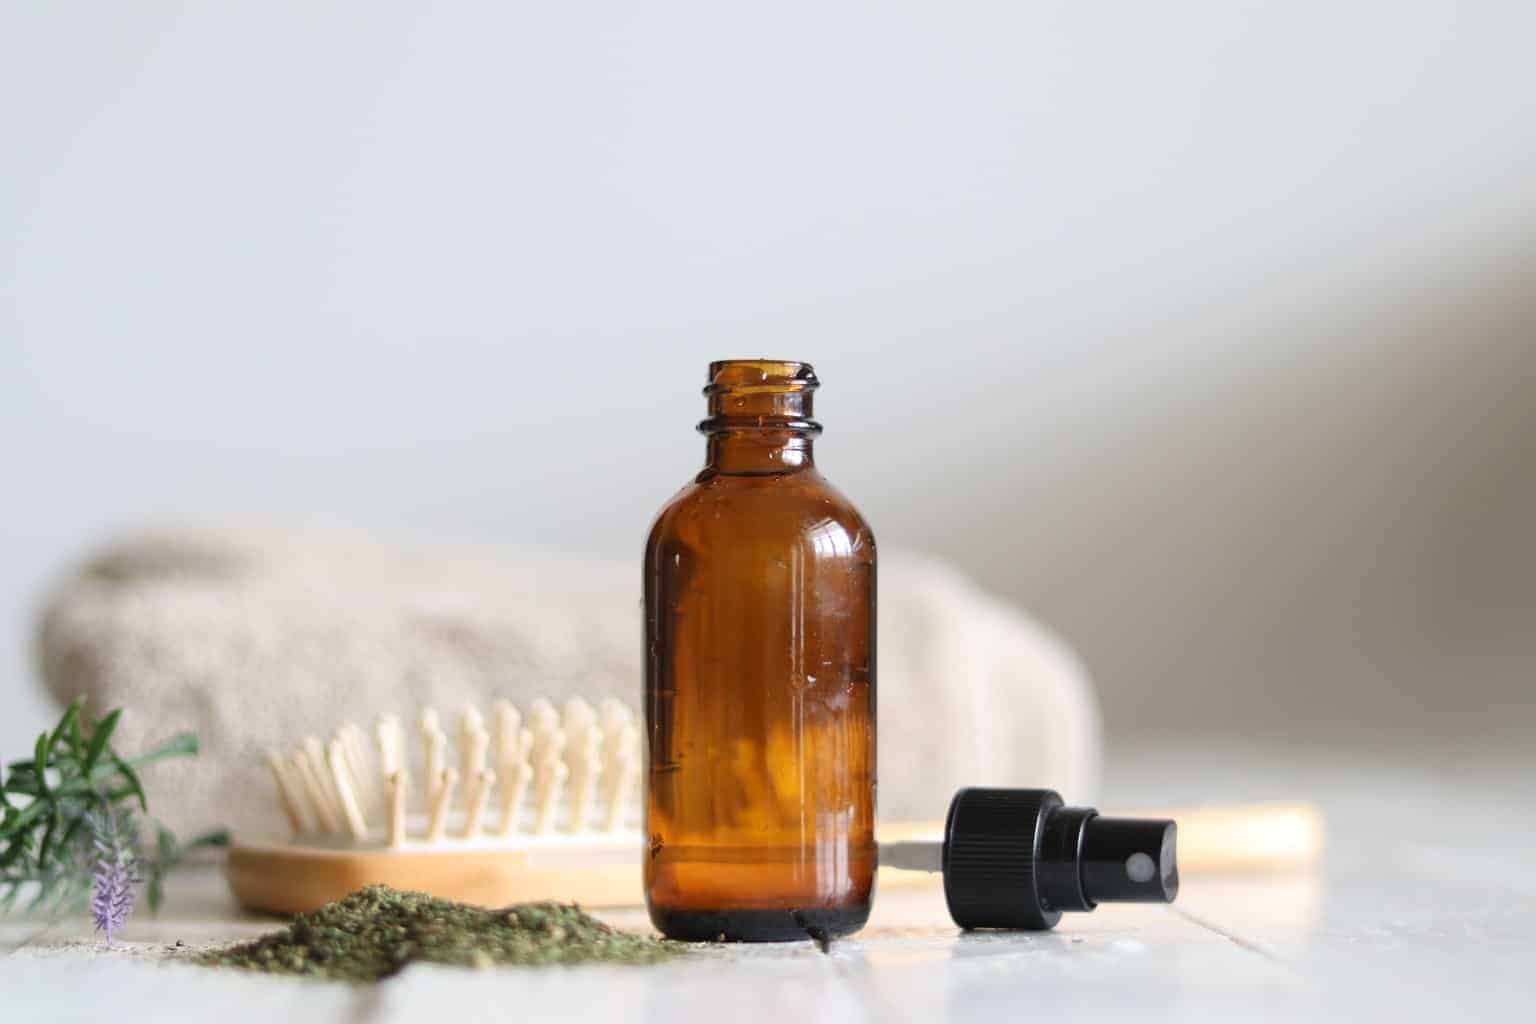 Spray bottle of homemade hair serum with hair brush and herbs in background.